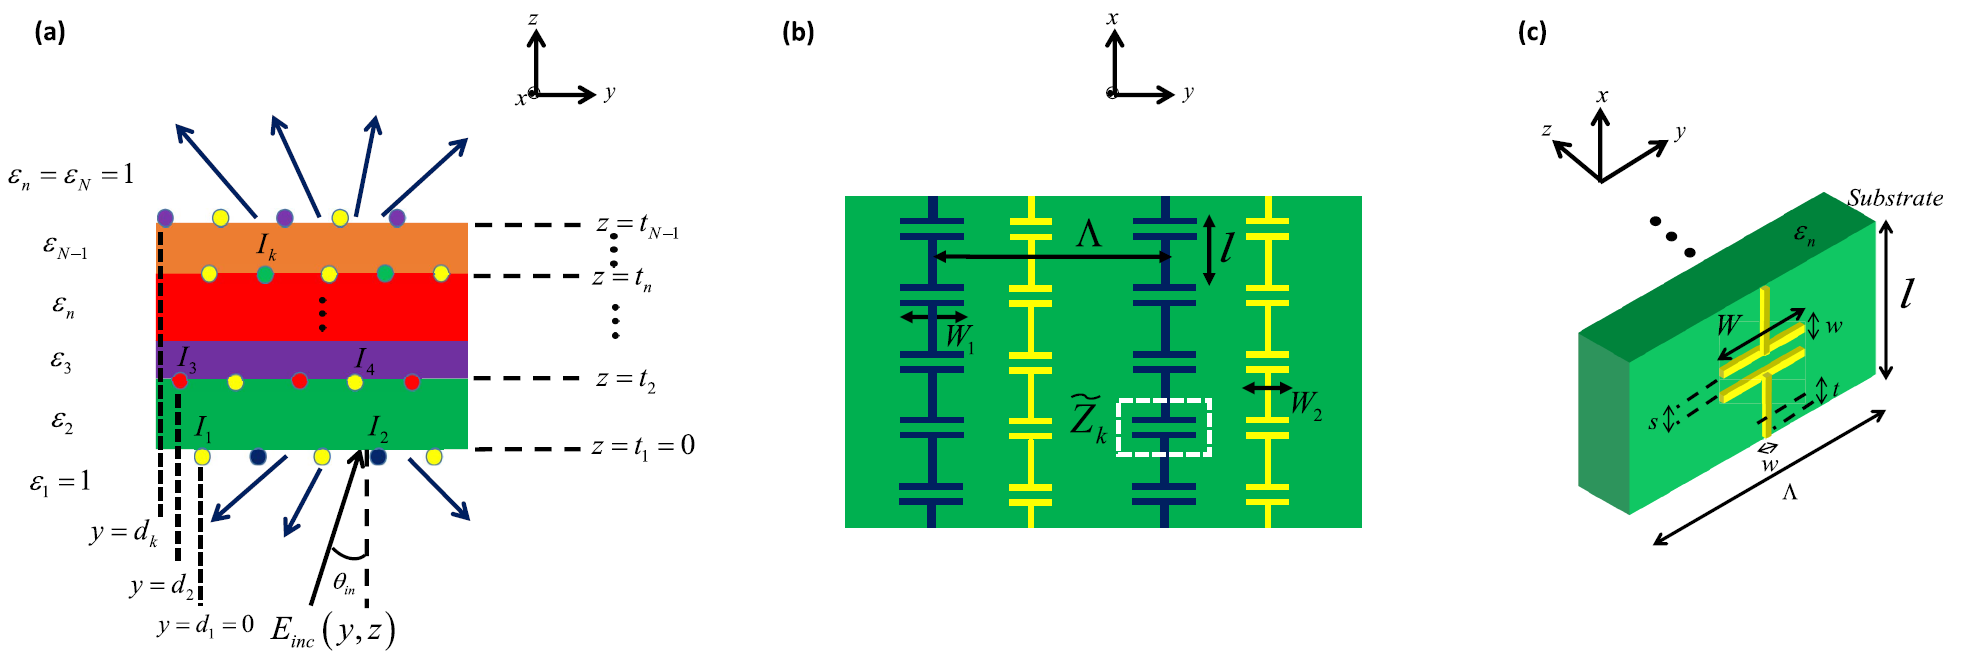 Metagratings for arbitrary diffraction engineering